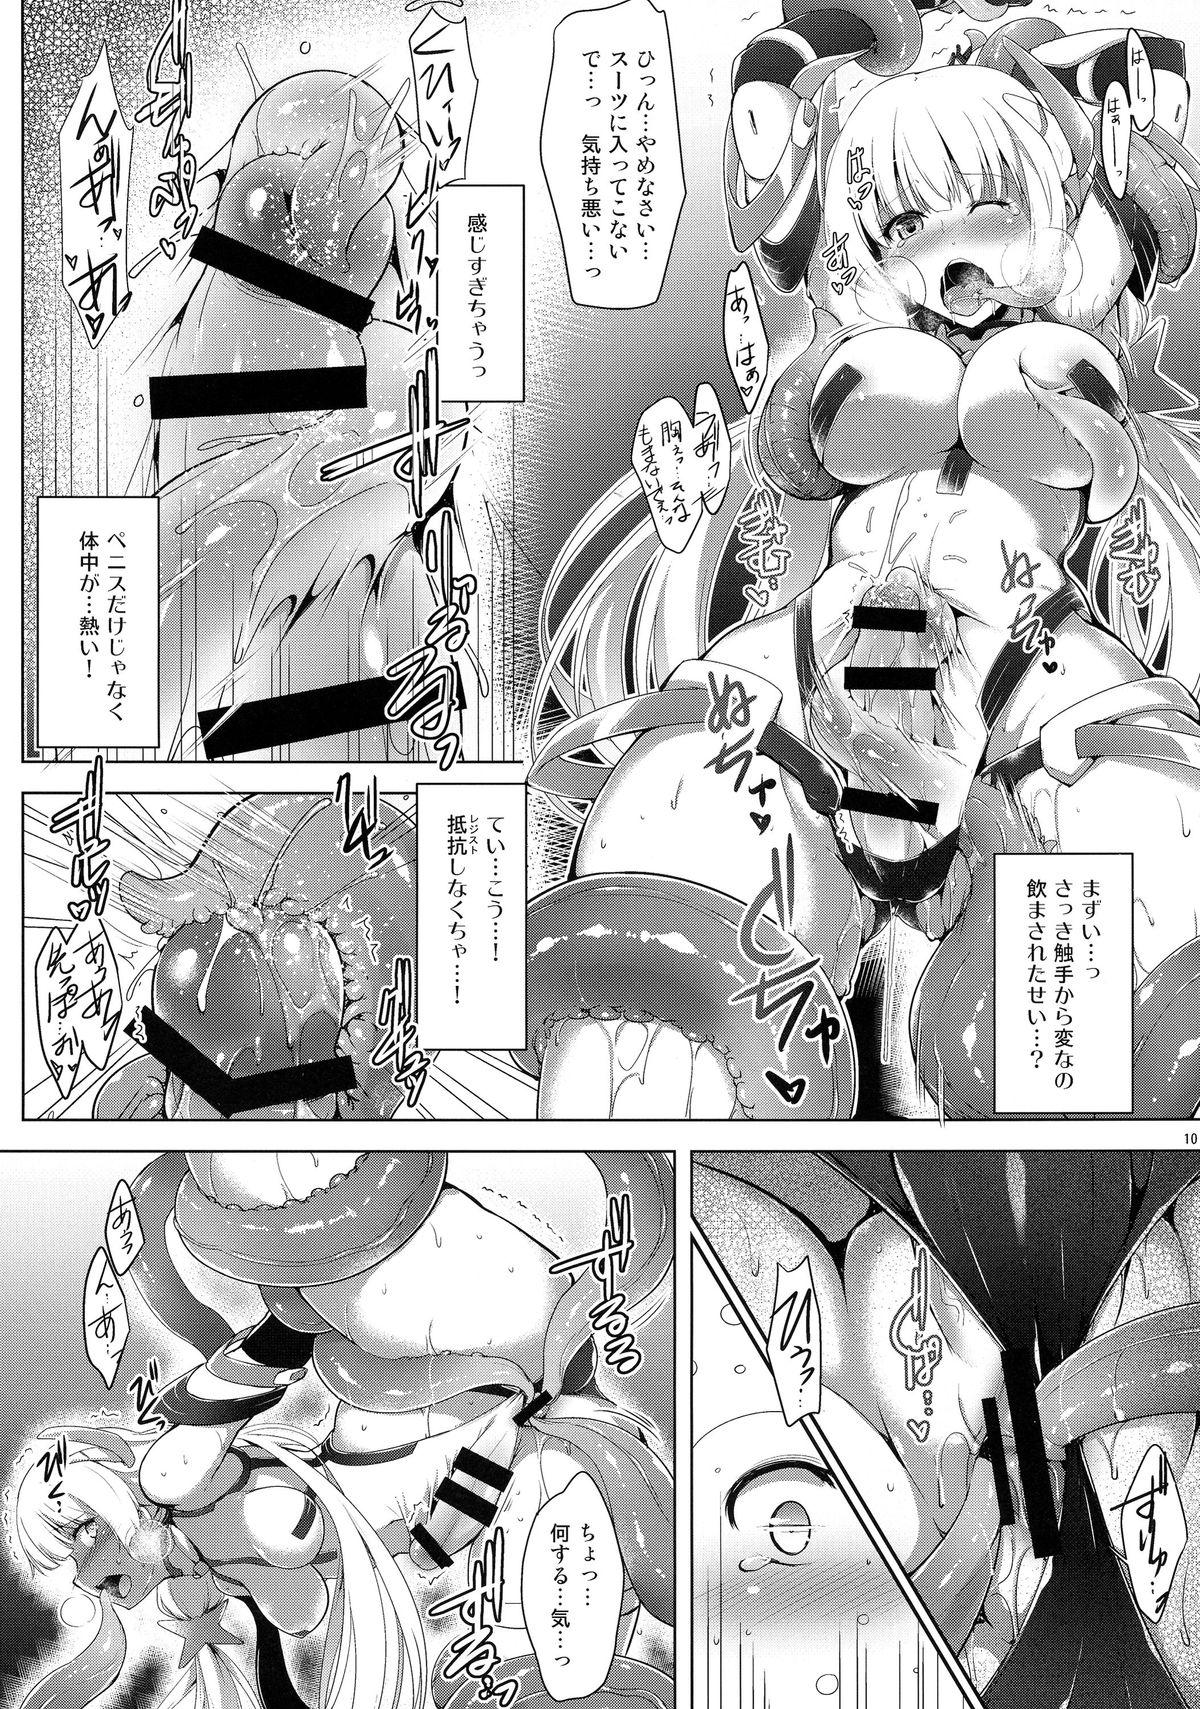 Pov Blowjob K.231 - Expelled from paradise Teensnow - Page 10